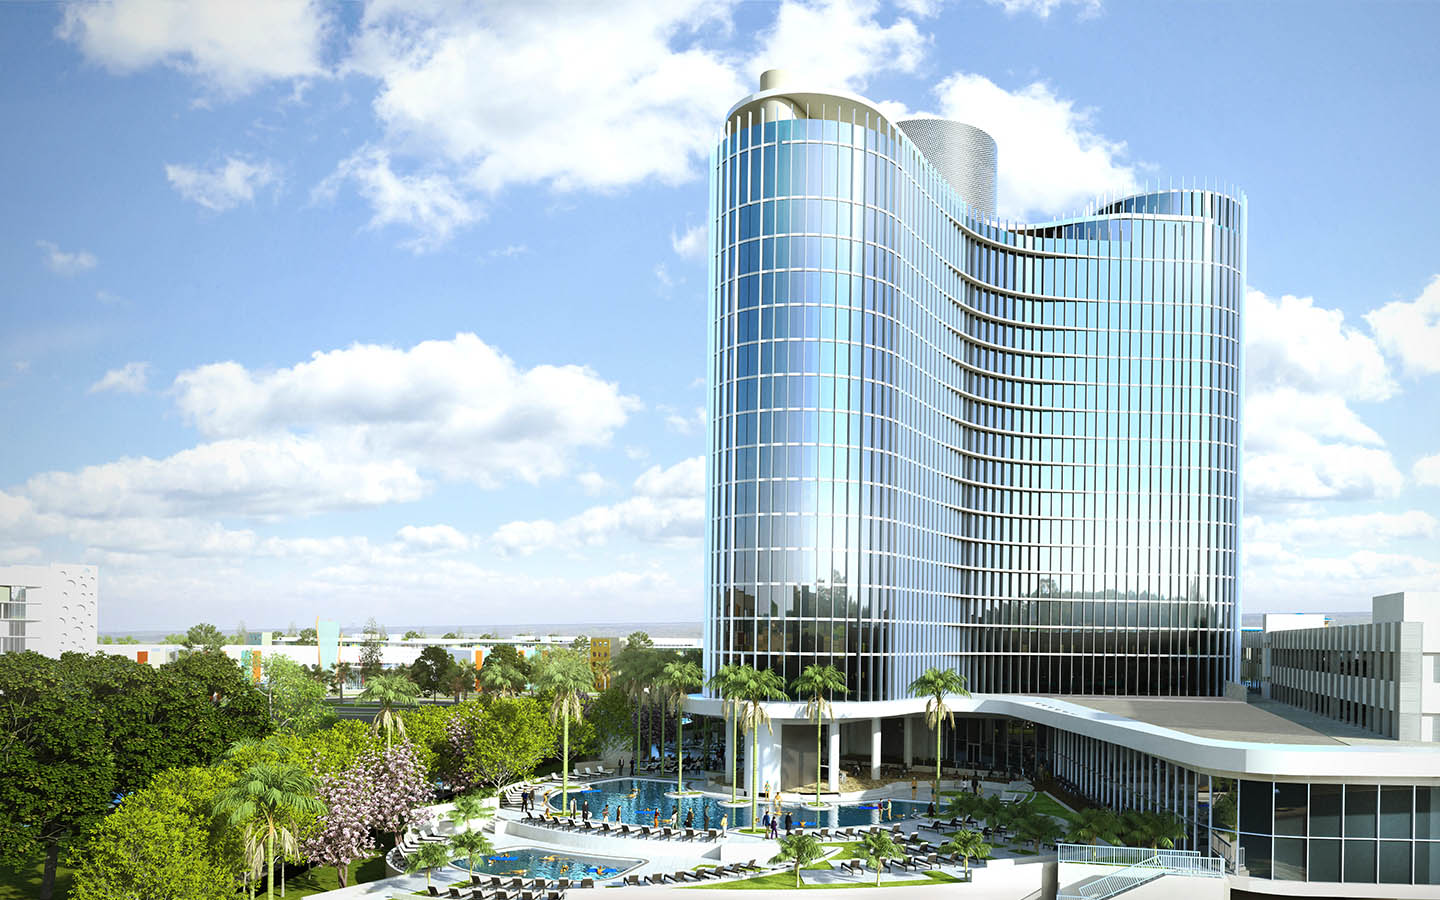 Universal’s Aventura Hotel to Bring Affordable-Chic to Life at Universal Orlando Resort in Summer 2018.